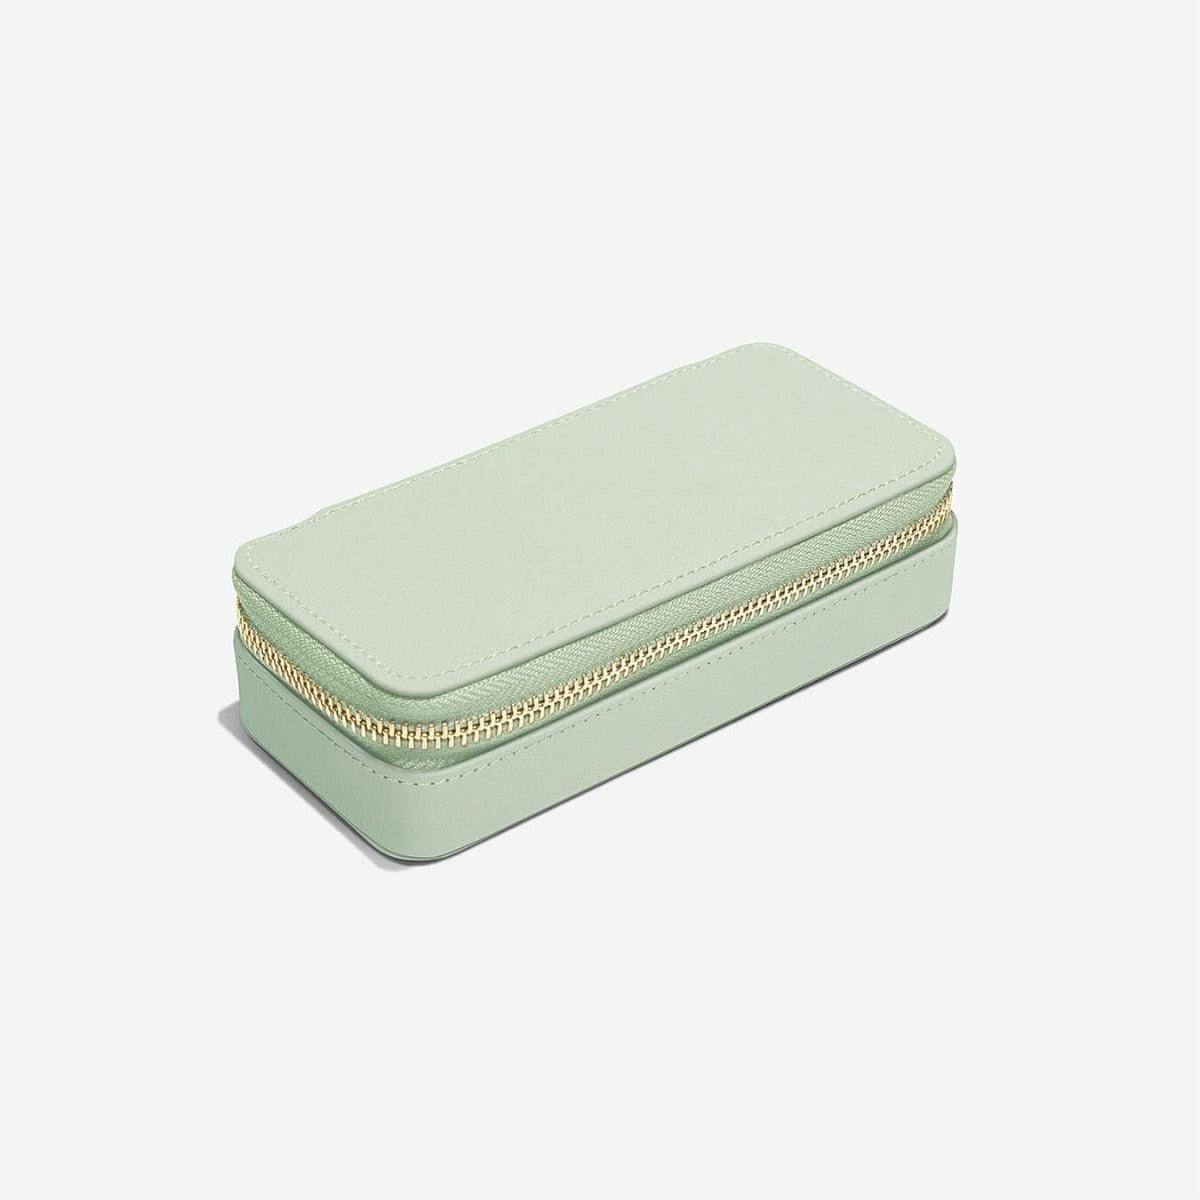 Stackers London Travel Jewellery Pouch Medium - Sage Green